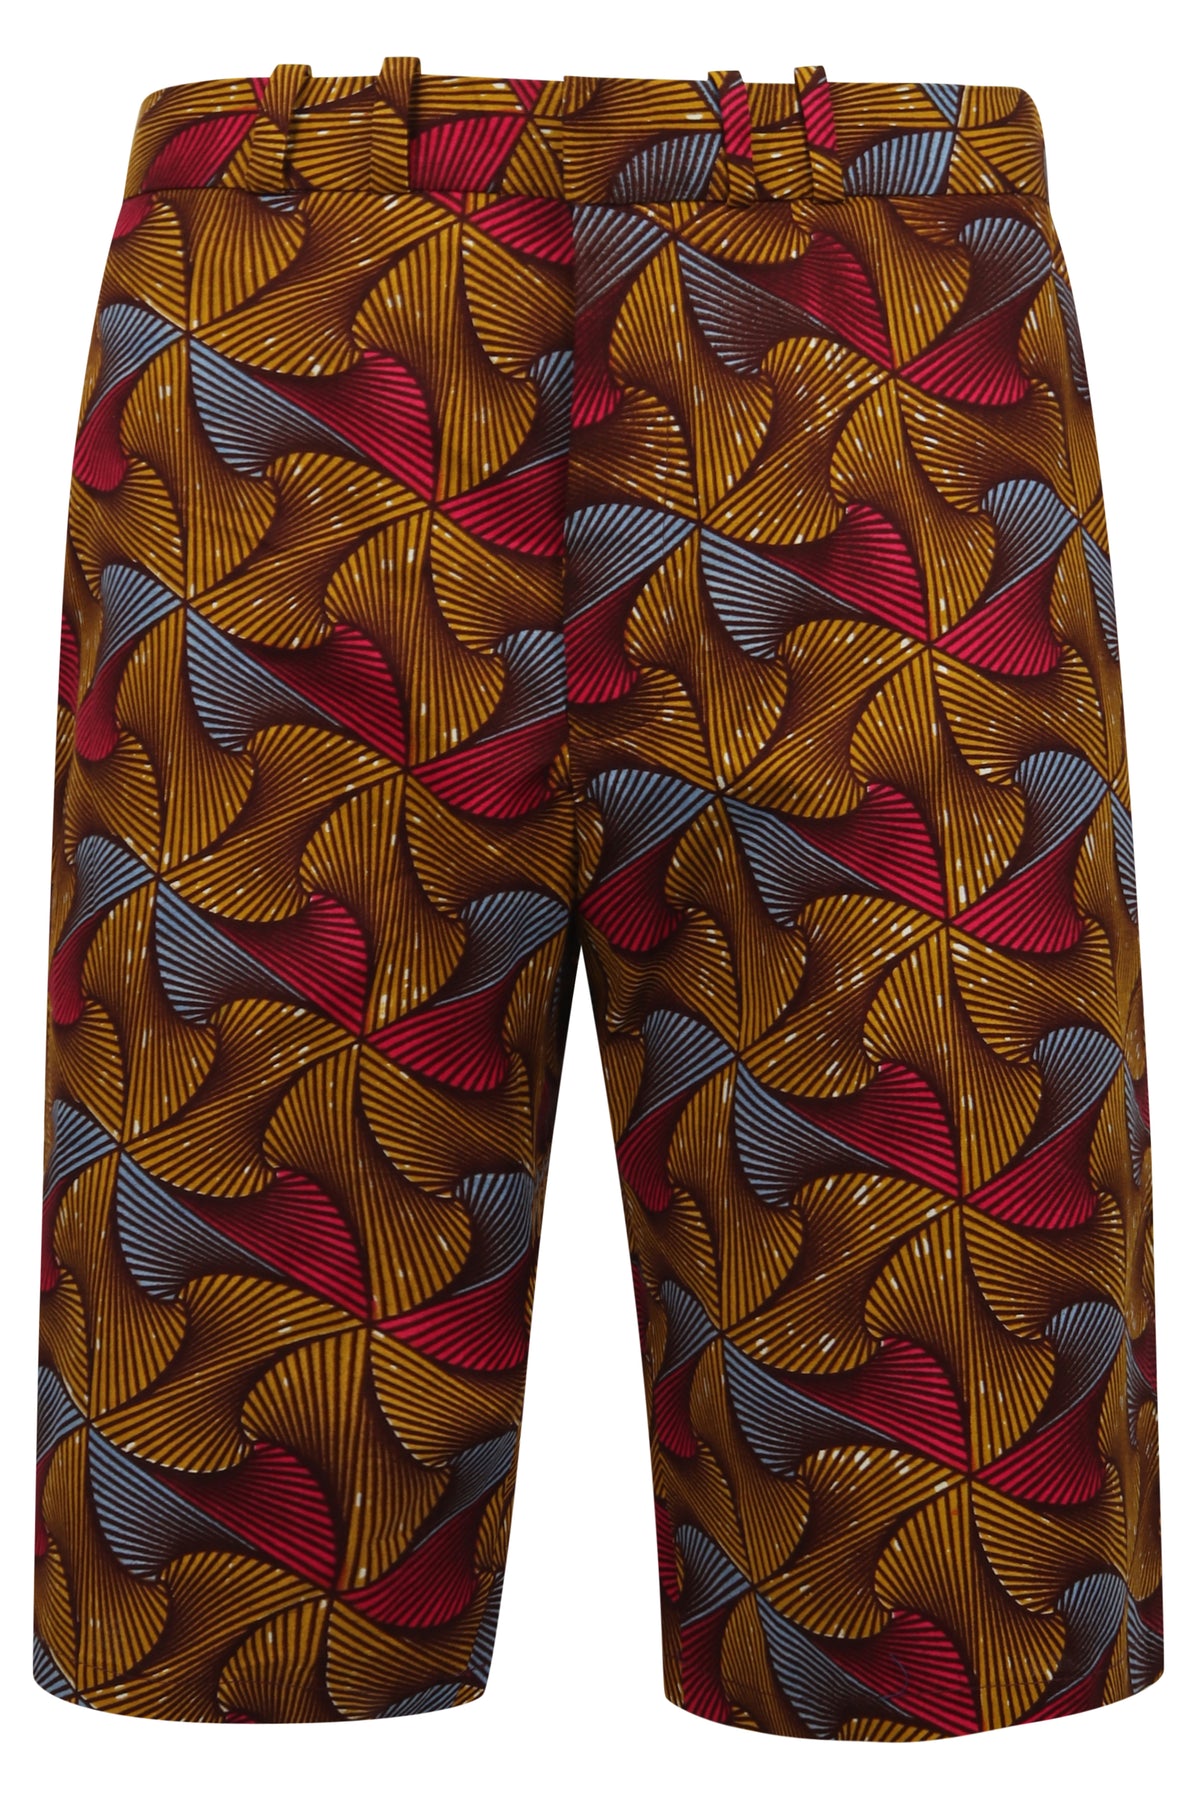 Jamie Men's African Print Fitted Shorts-Crossways - OHEMA OHENE AFRICAN INSPIRED FASHION